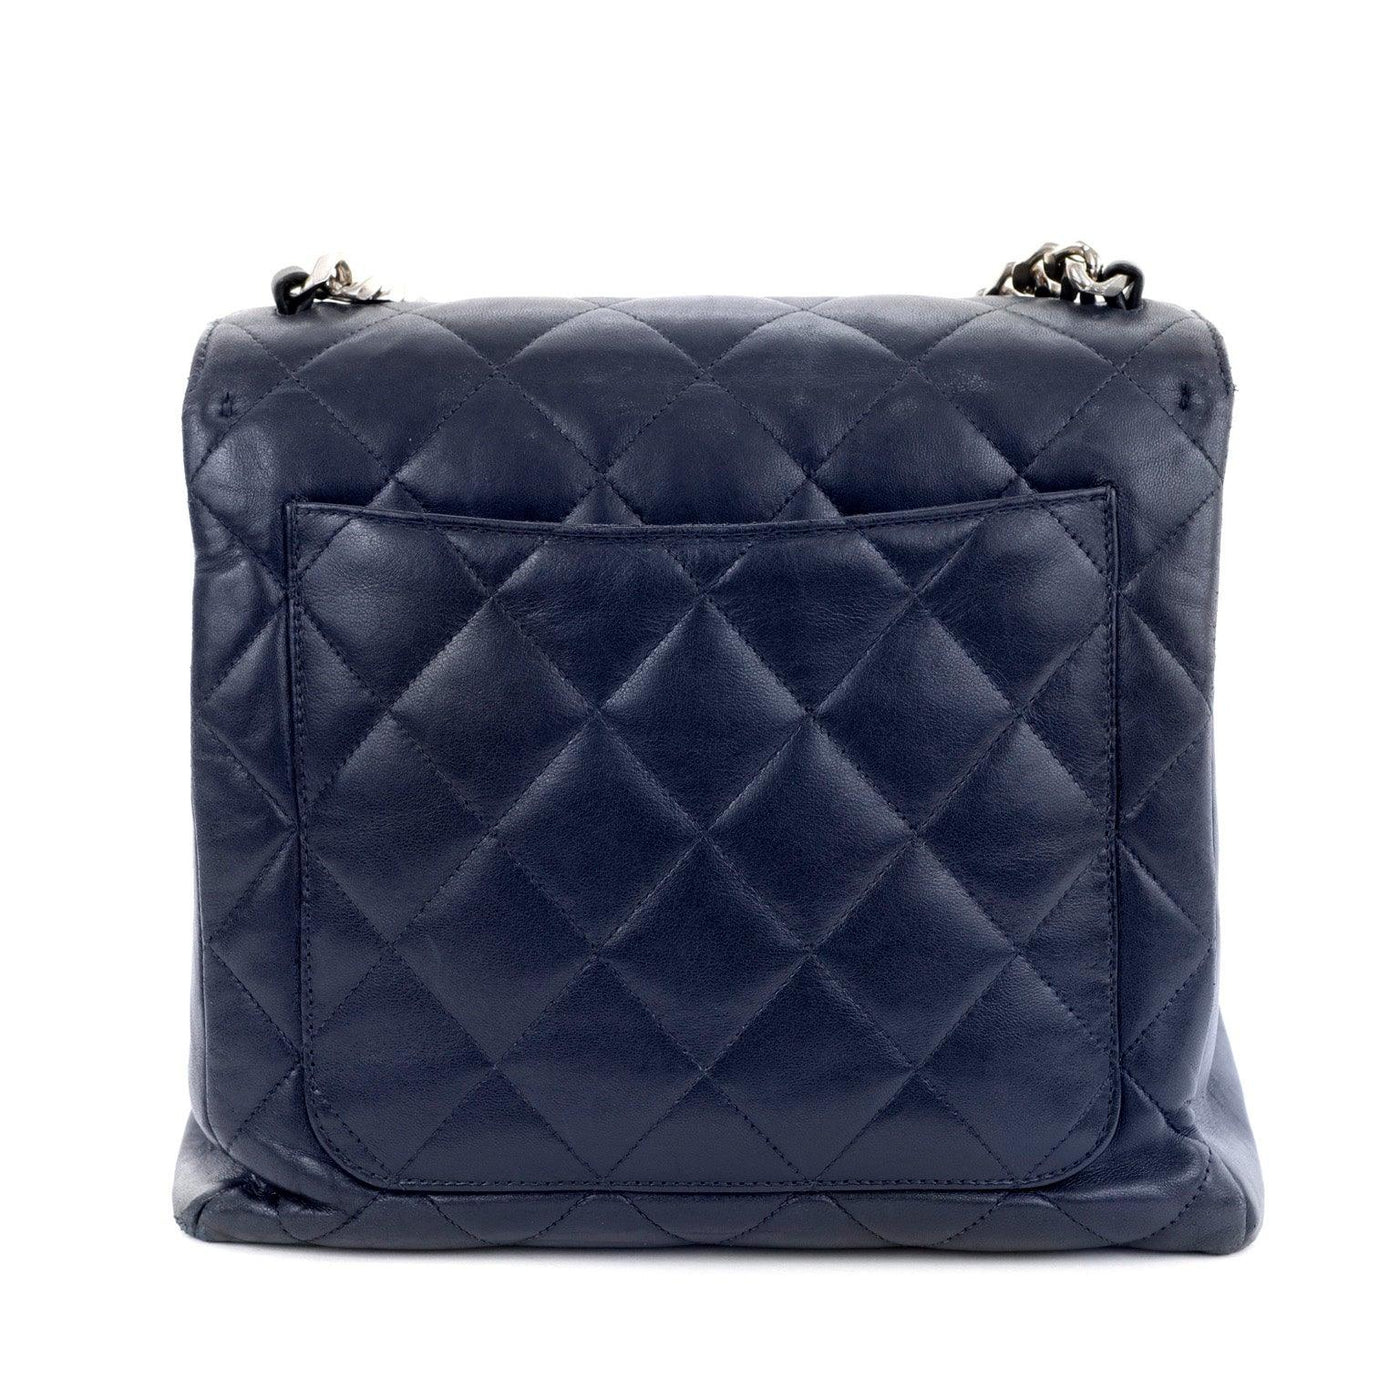 Chanel Navy Blue Lambskin Flap Bag with Silver Curb Chain Strap - Only Authentics